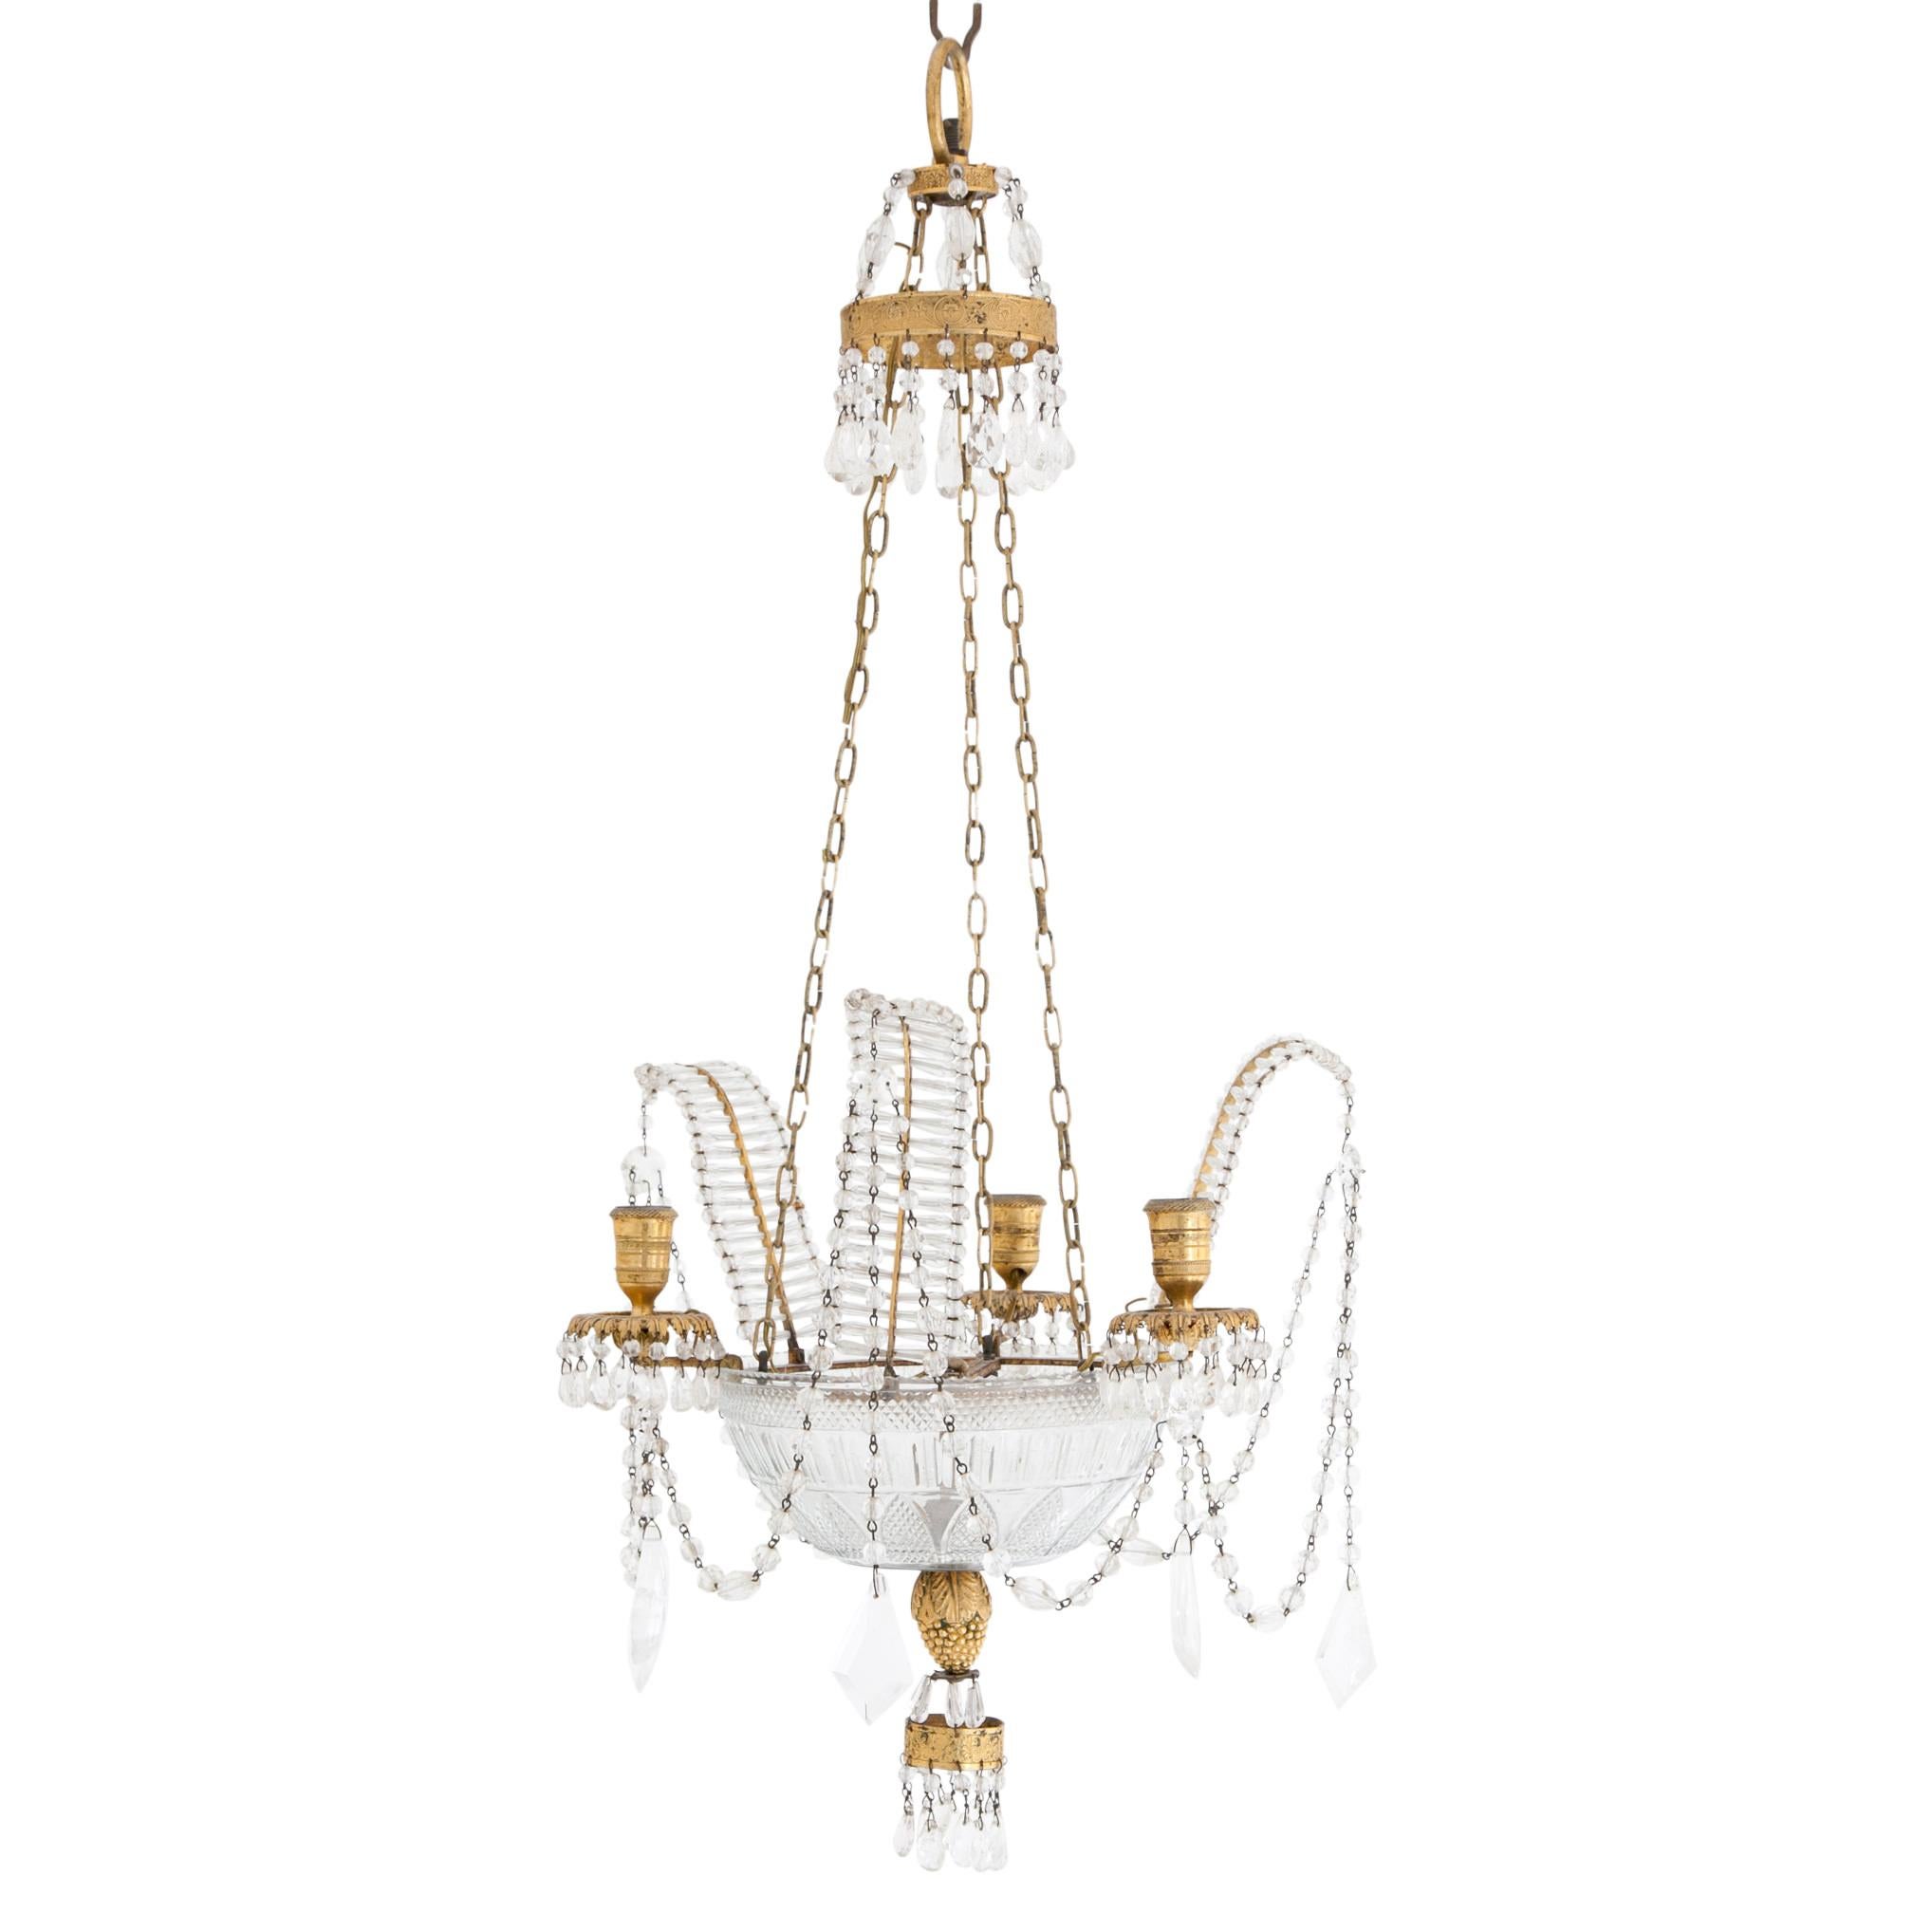 Four-light chandelier with a facetted glass dish, clear quartz prisms and fire-gilt mounting, probably Vienna, circa 1800. Measurement: 86 x Ø 40 cm.